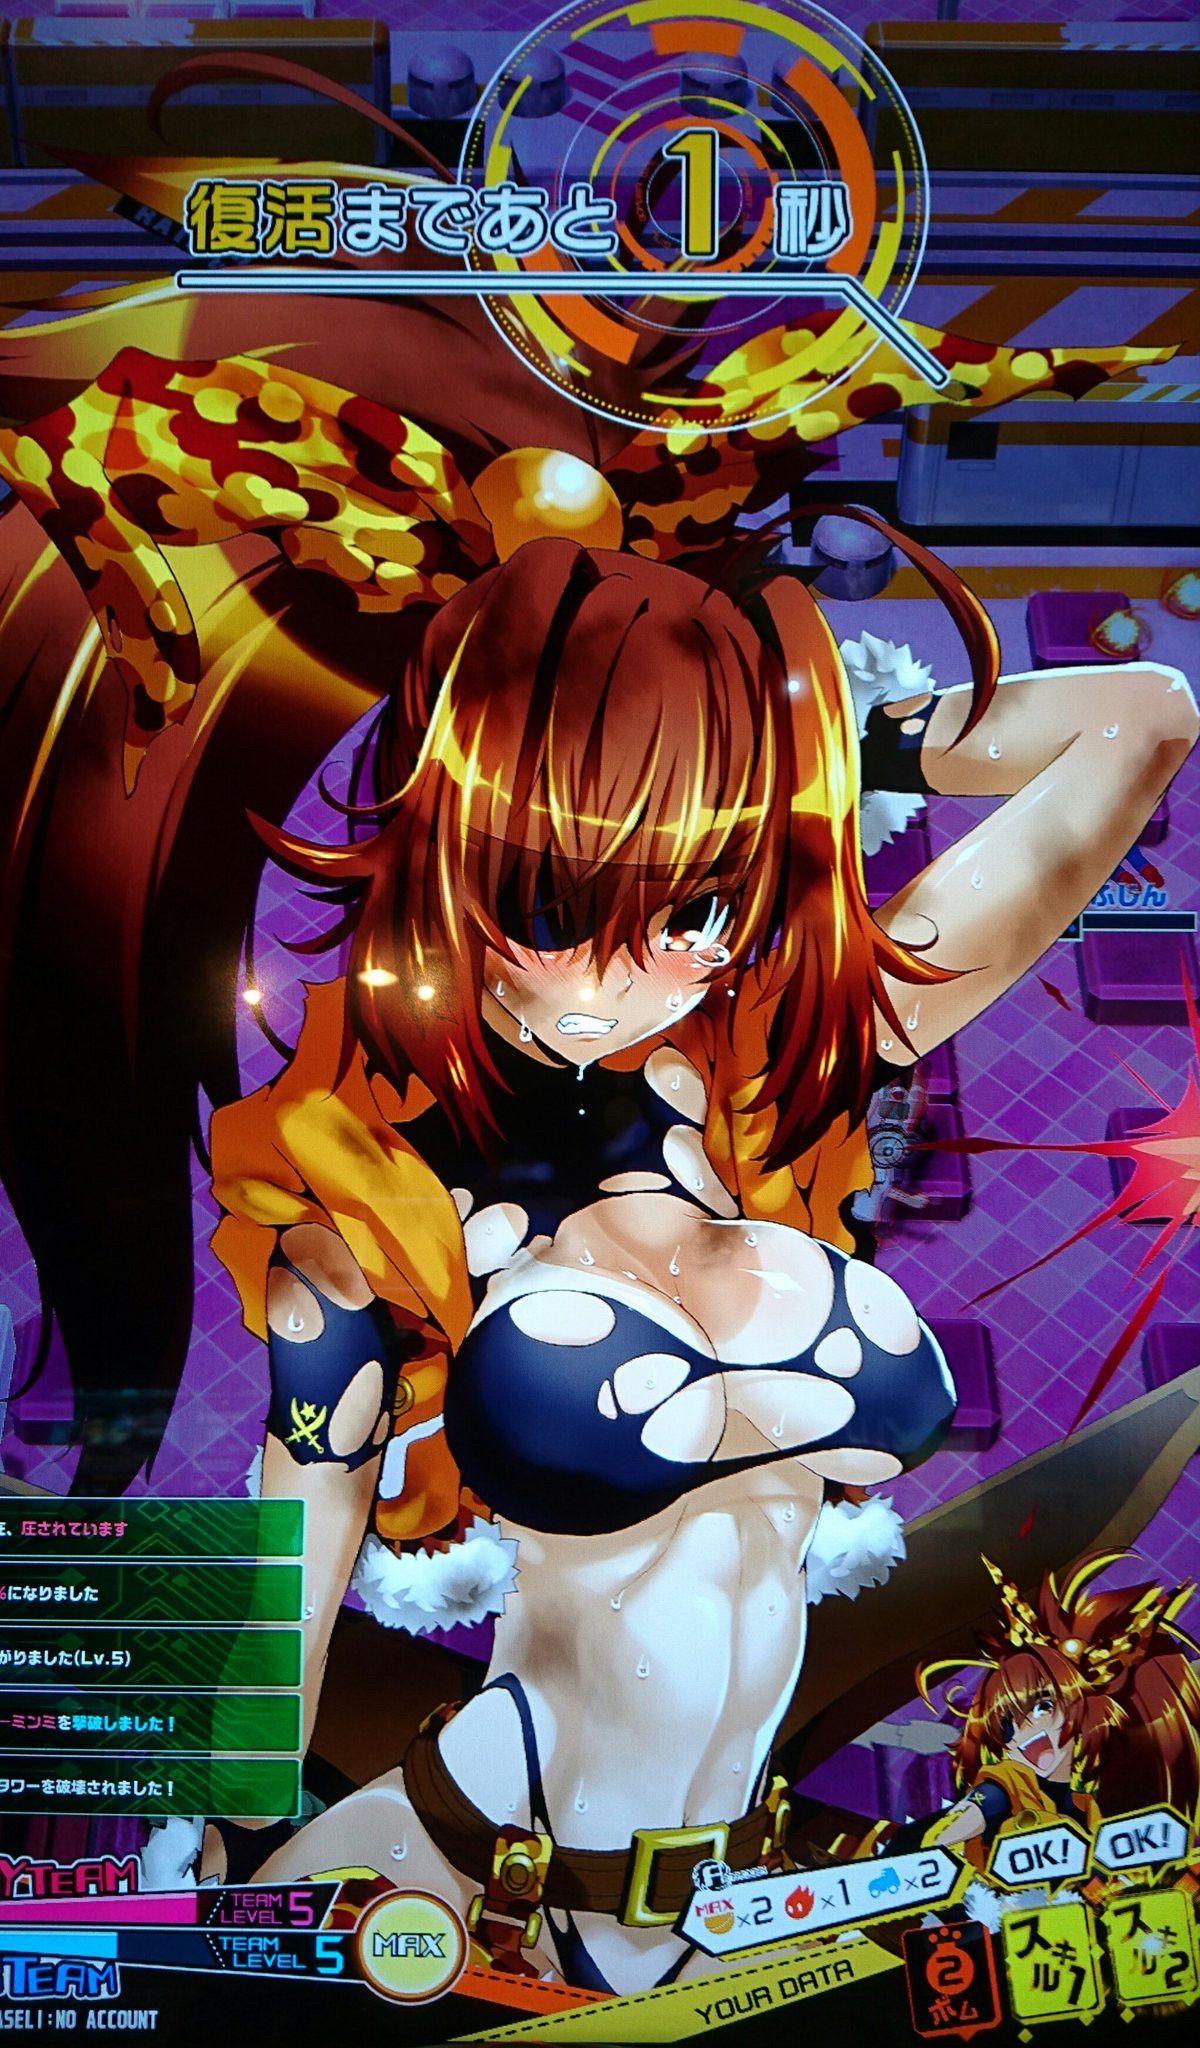 [Good news] Bomber Girl's new costume erotic too! This is already Eroge, isn't it www? 6